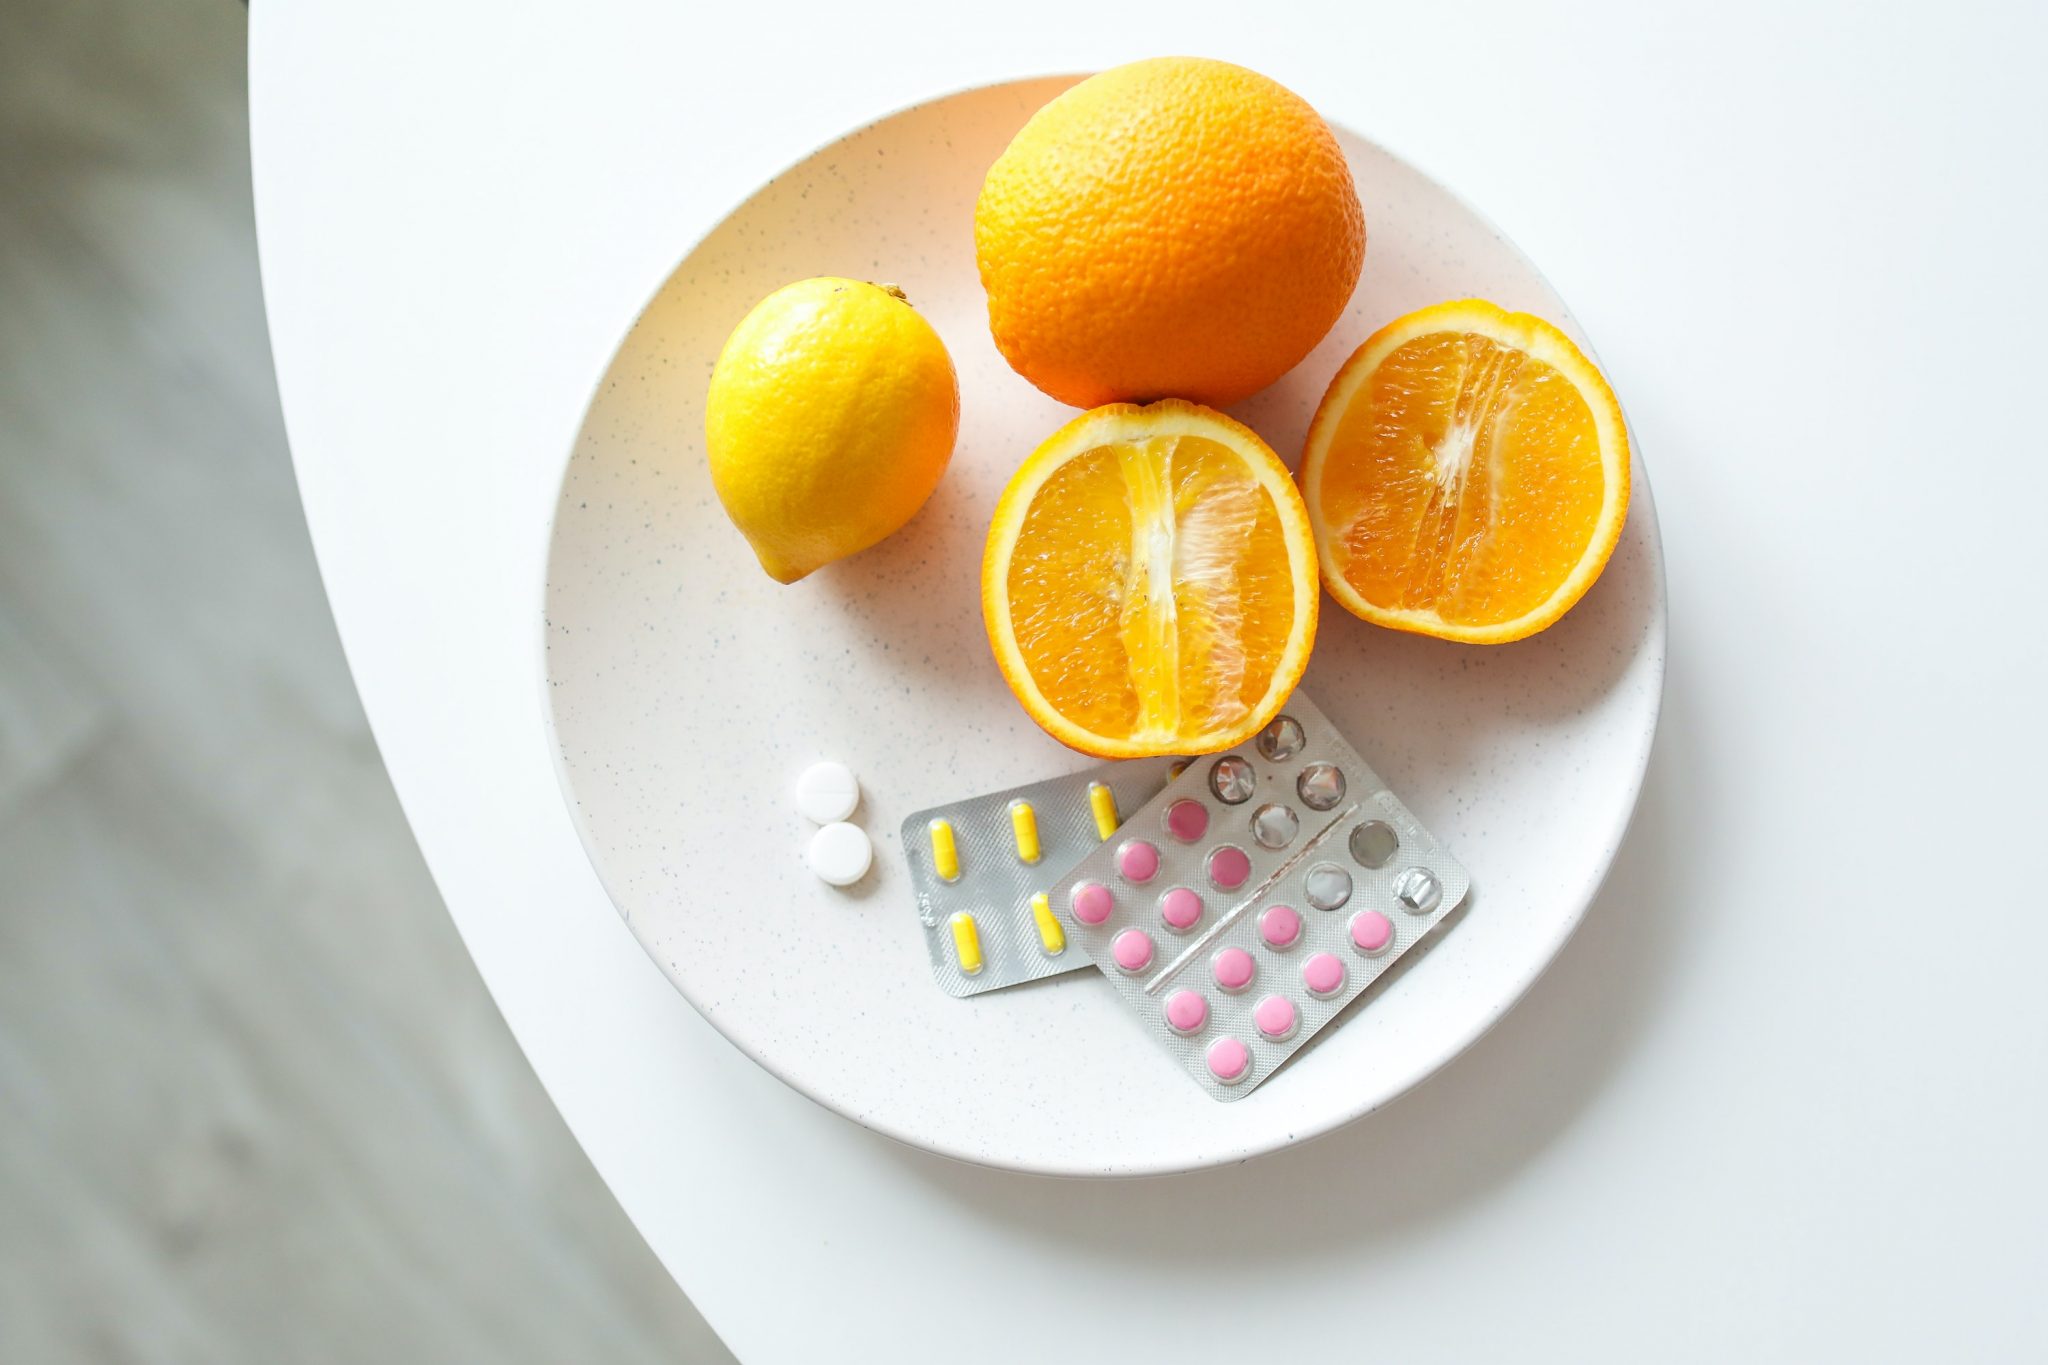 Discover the Best Daily Supplements and Vitamins for Adults